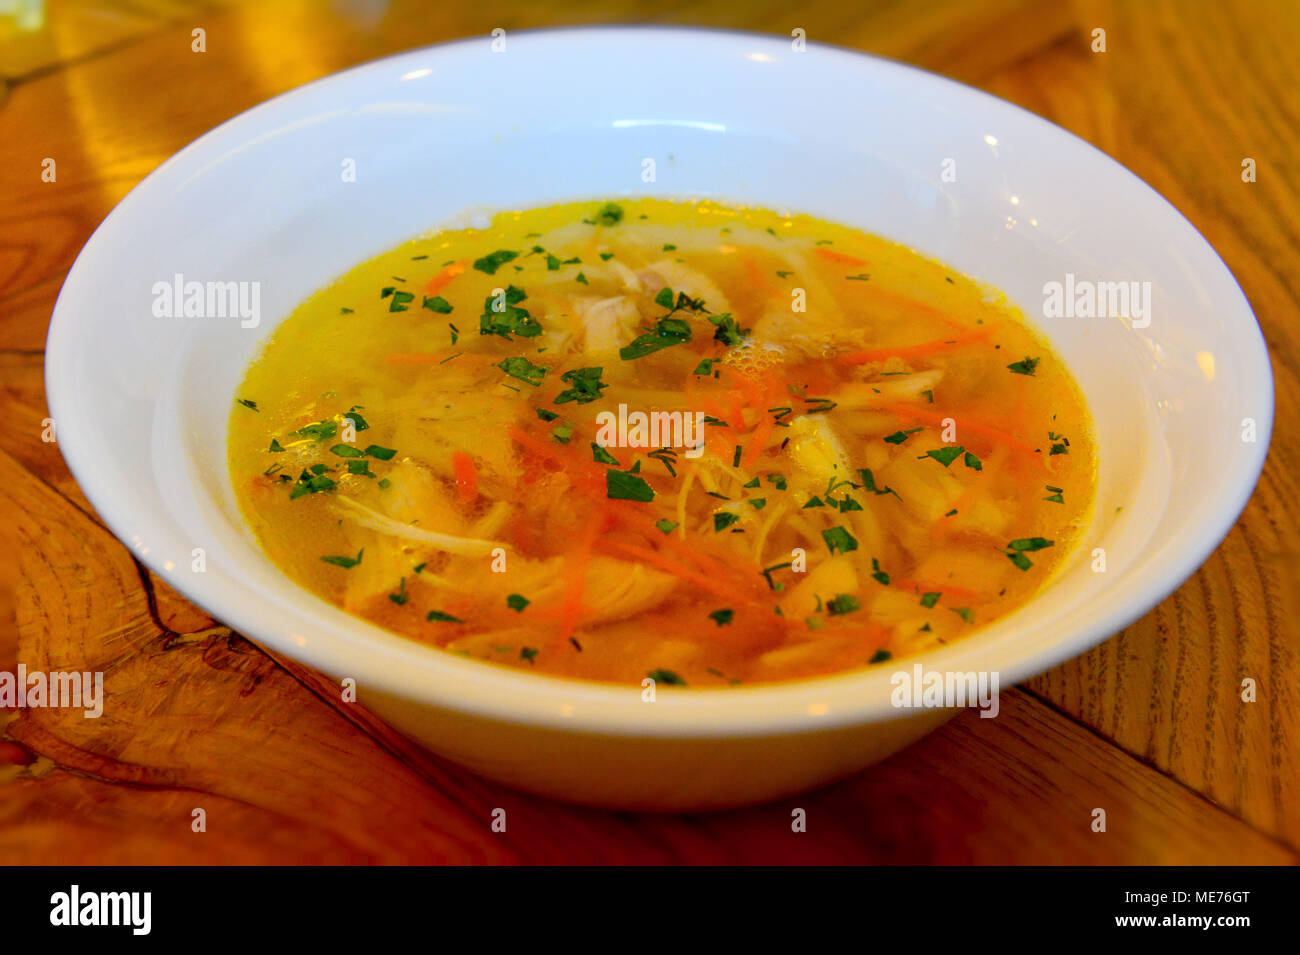 Plate of chicken noodle soup on the table. Stock Photo